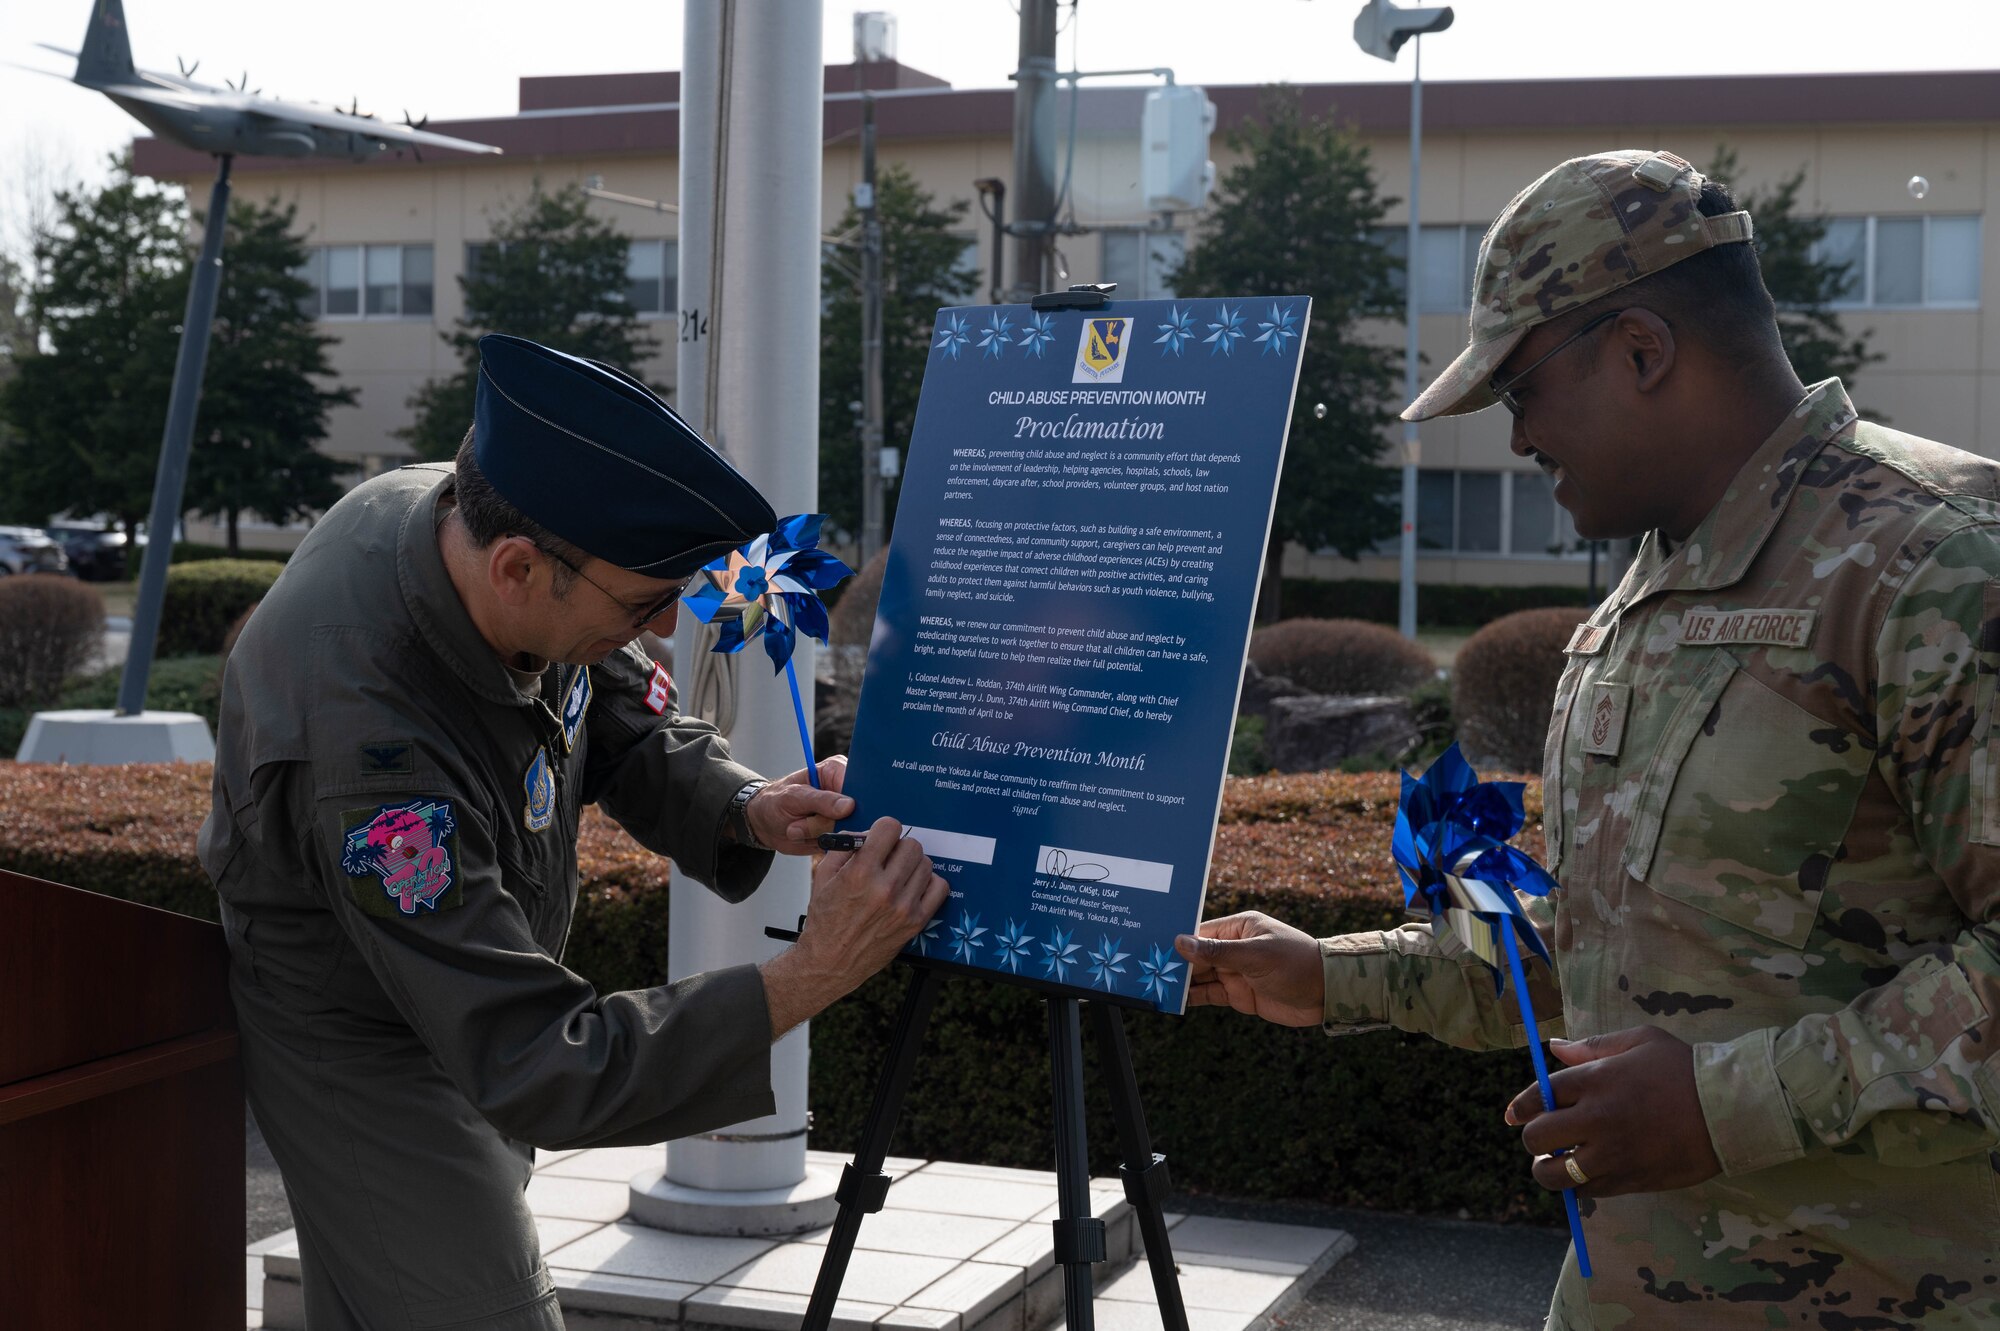 An Airman signs a proclamation and another Airman stands while holding a pinwheel.